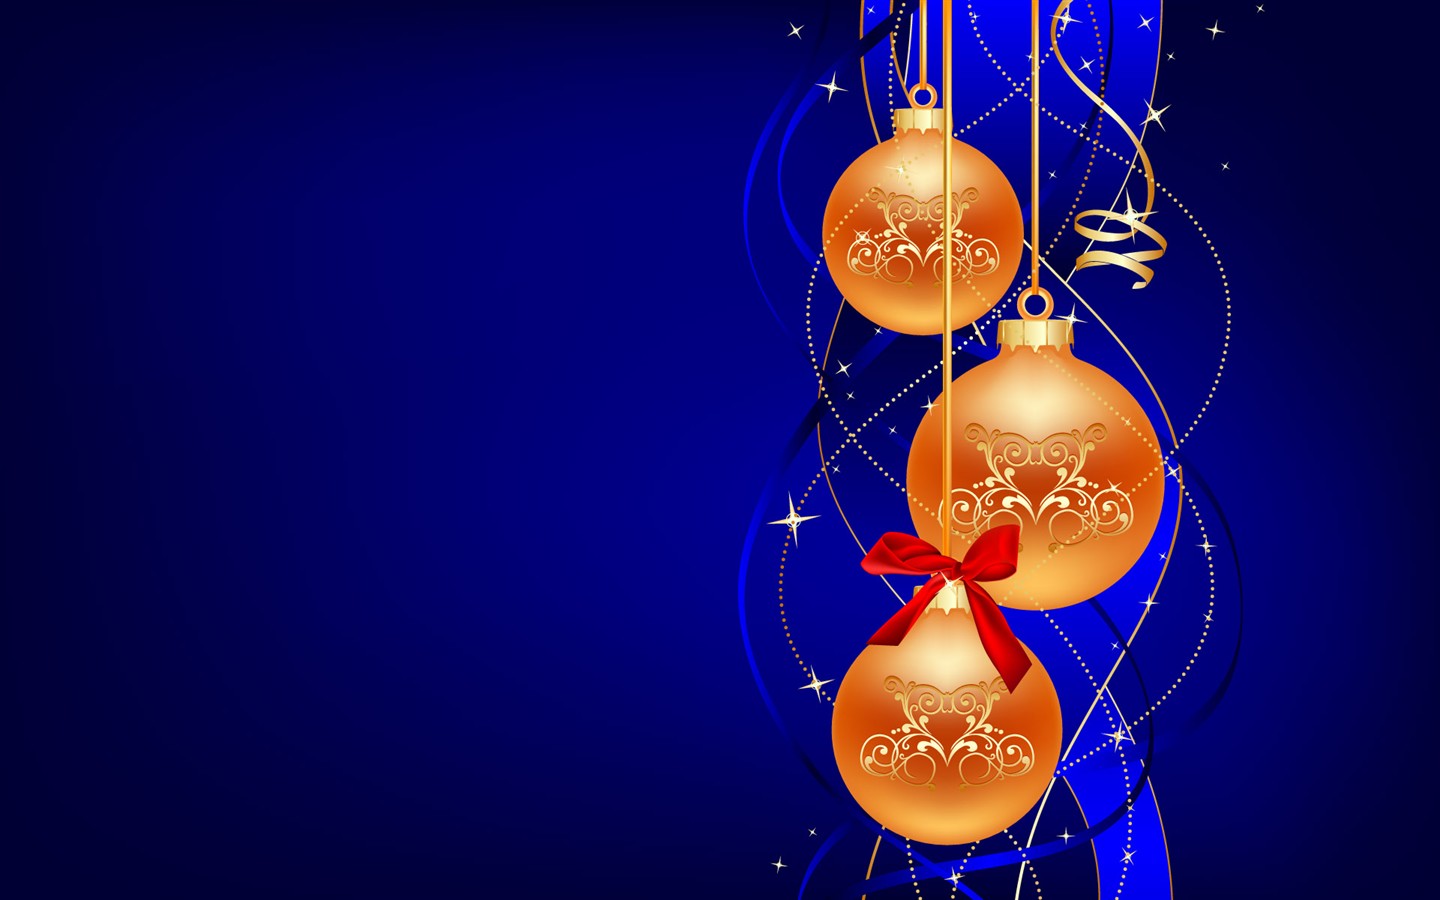 Exquisite Christmas Theme HD Wallpapers #26 - 1440x900